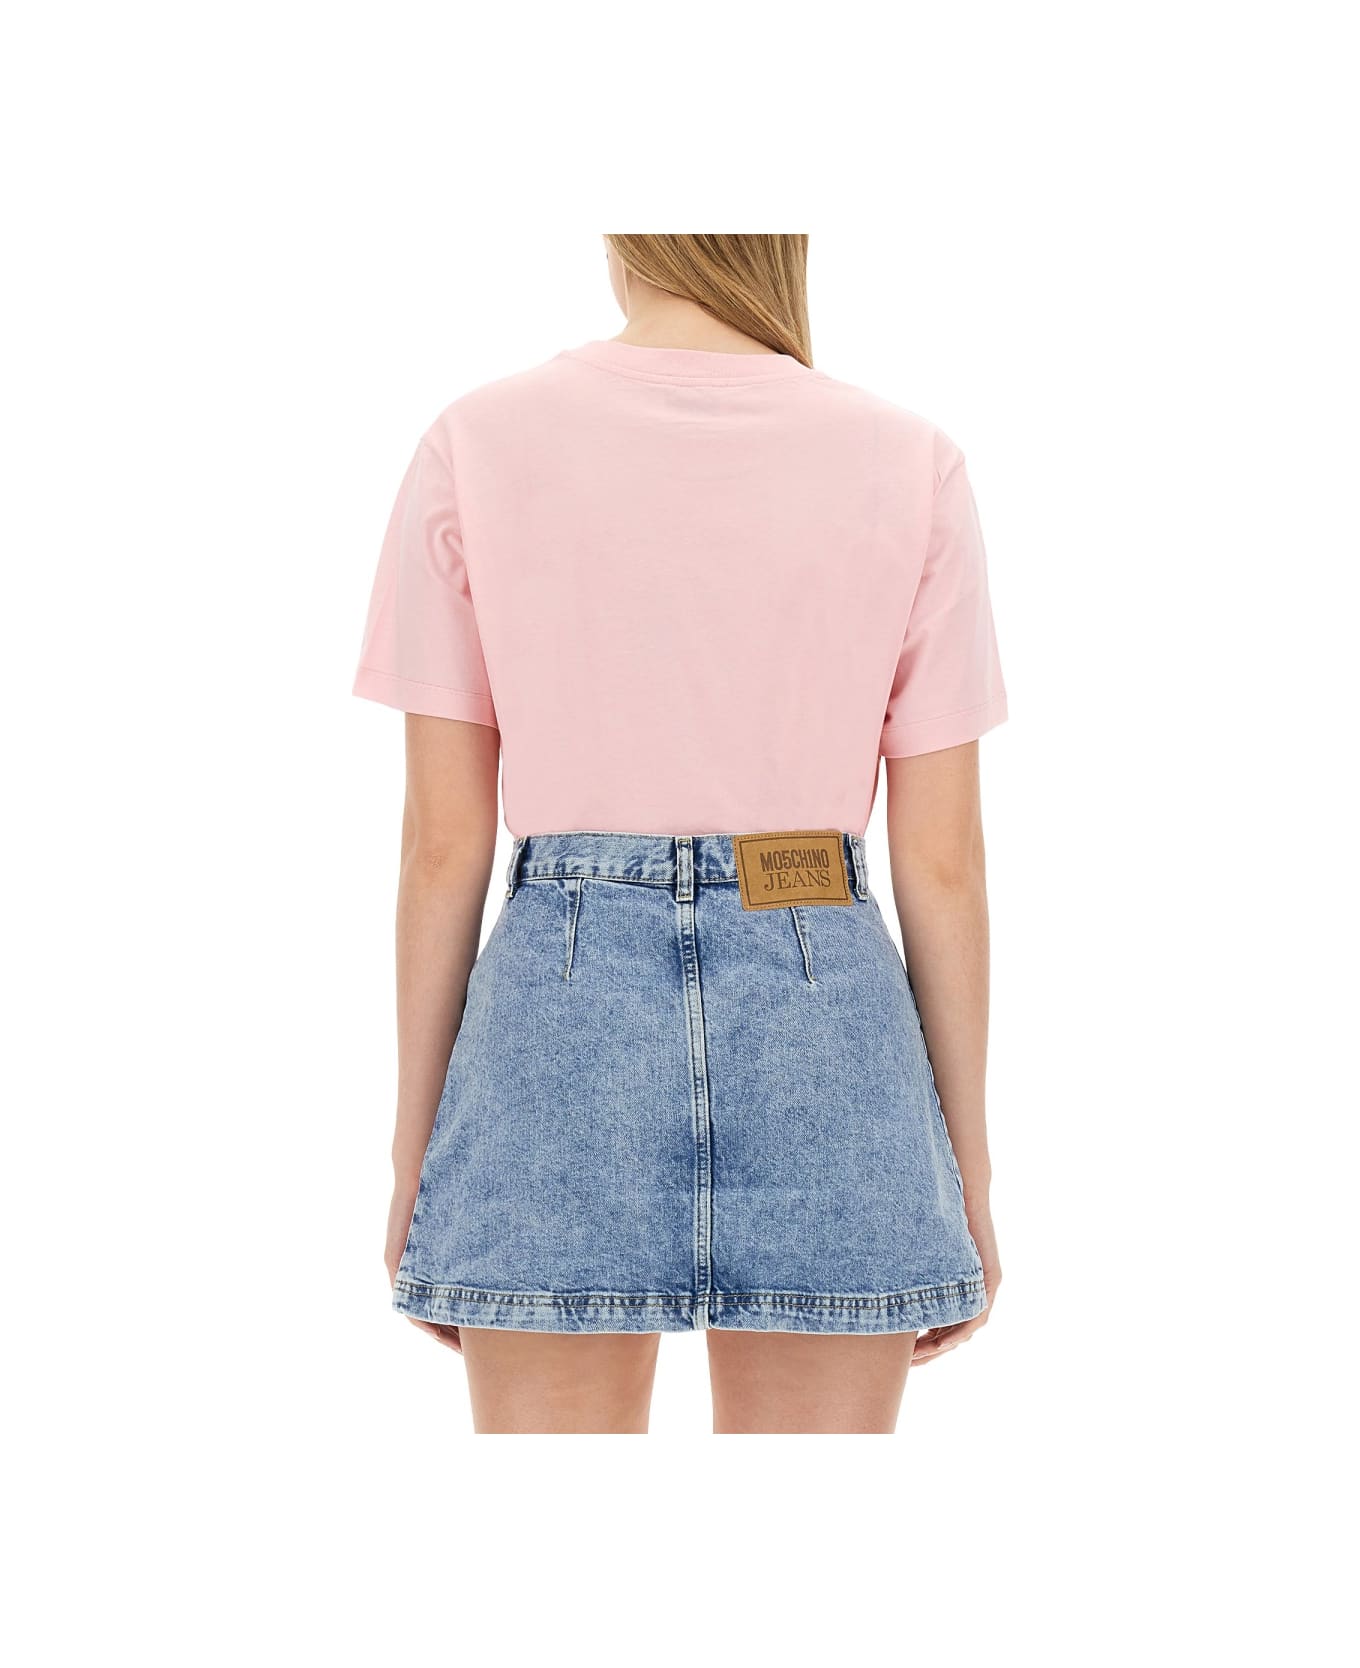 M05CH1N0 Jeans T-shirt With Logo - PINK